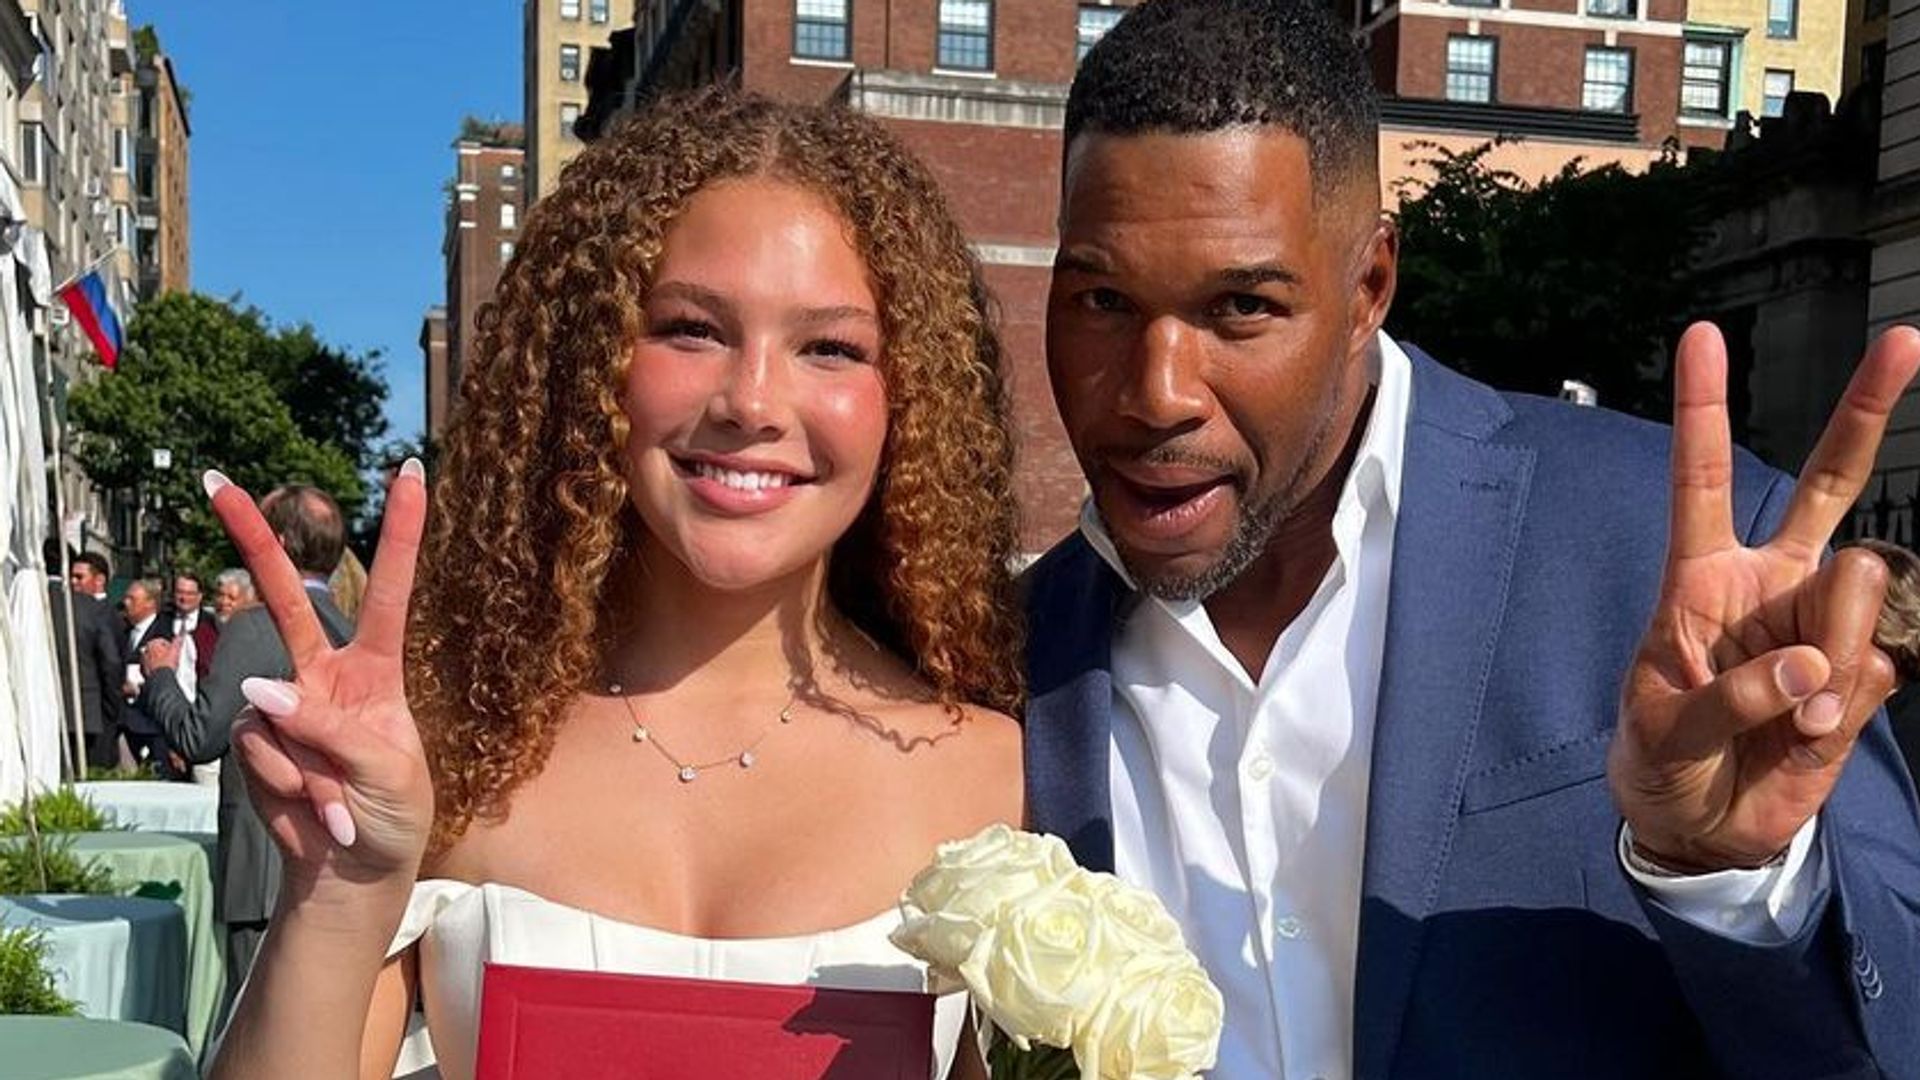 Michael Strahan in a blue suit making a peace sign with daughter Isabella